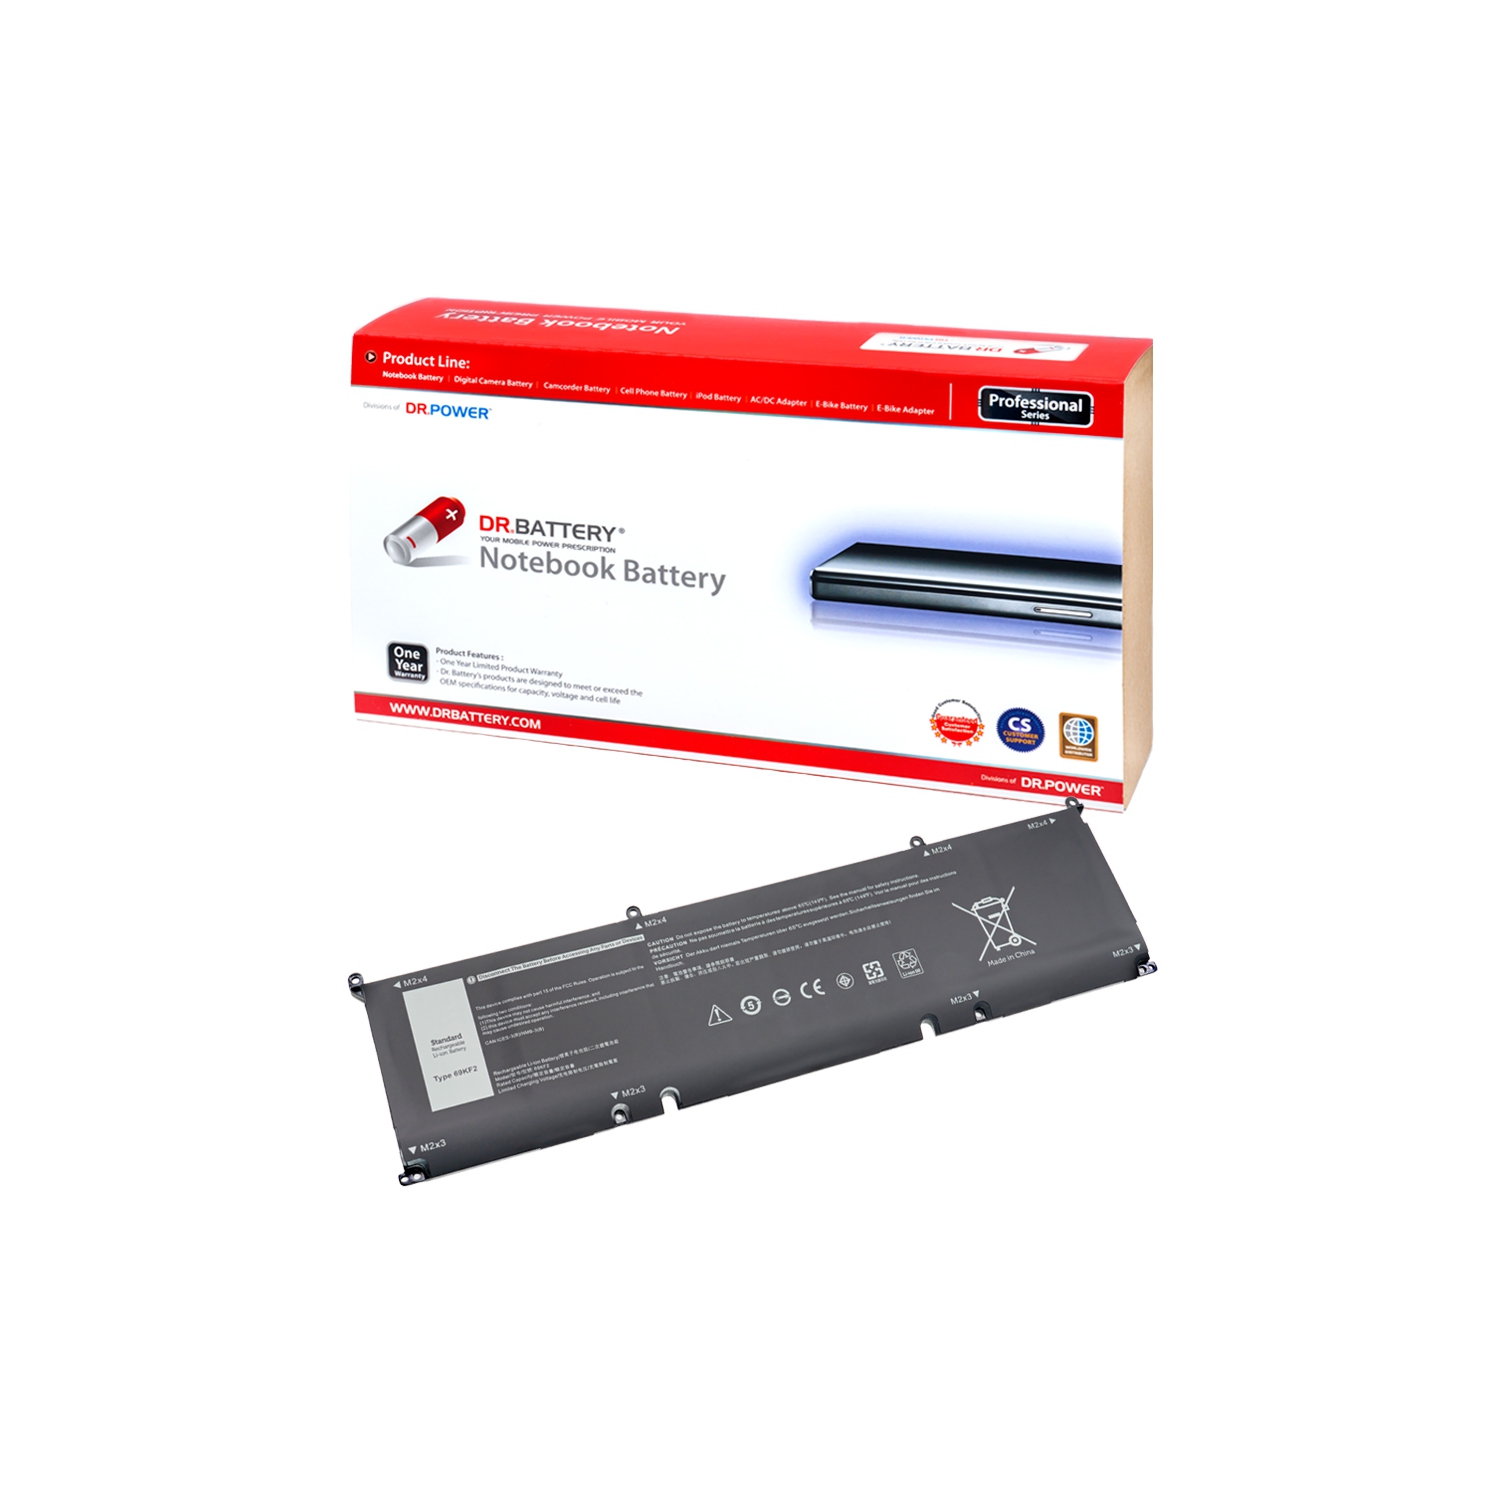 DR. BATTERY - Replacement for Dell Alienware M15 2020 M17 R4 / ALW15M-5758W / M15 R3 P87F / M15 R4 / 69KF2 / 70N2F / M59JH [11.4V / 7545mAh / 86Wh] ***Free Shipping***